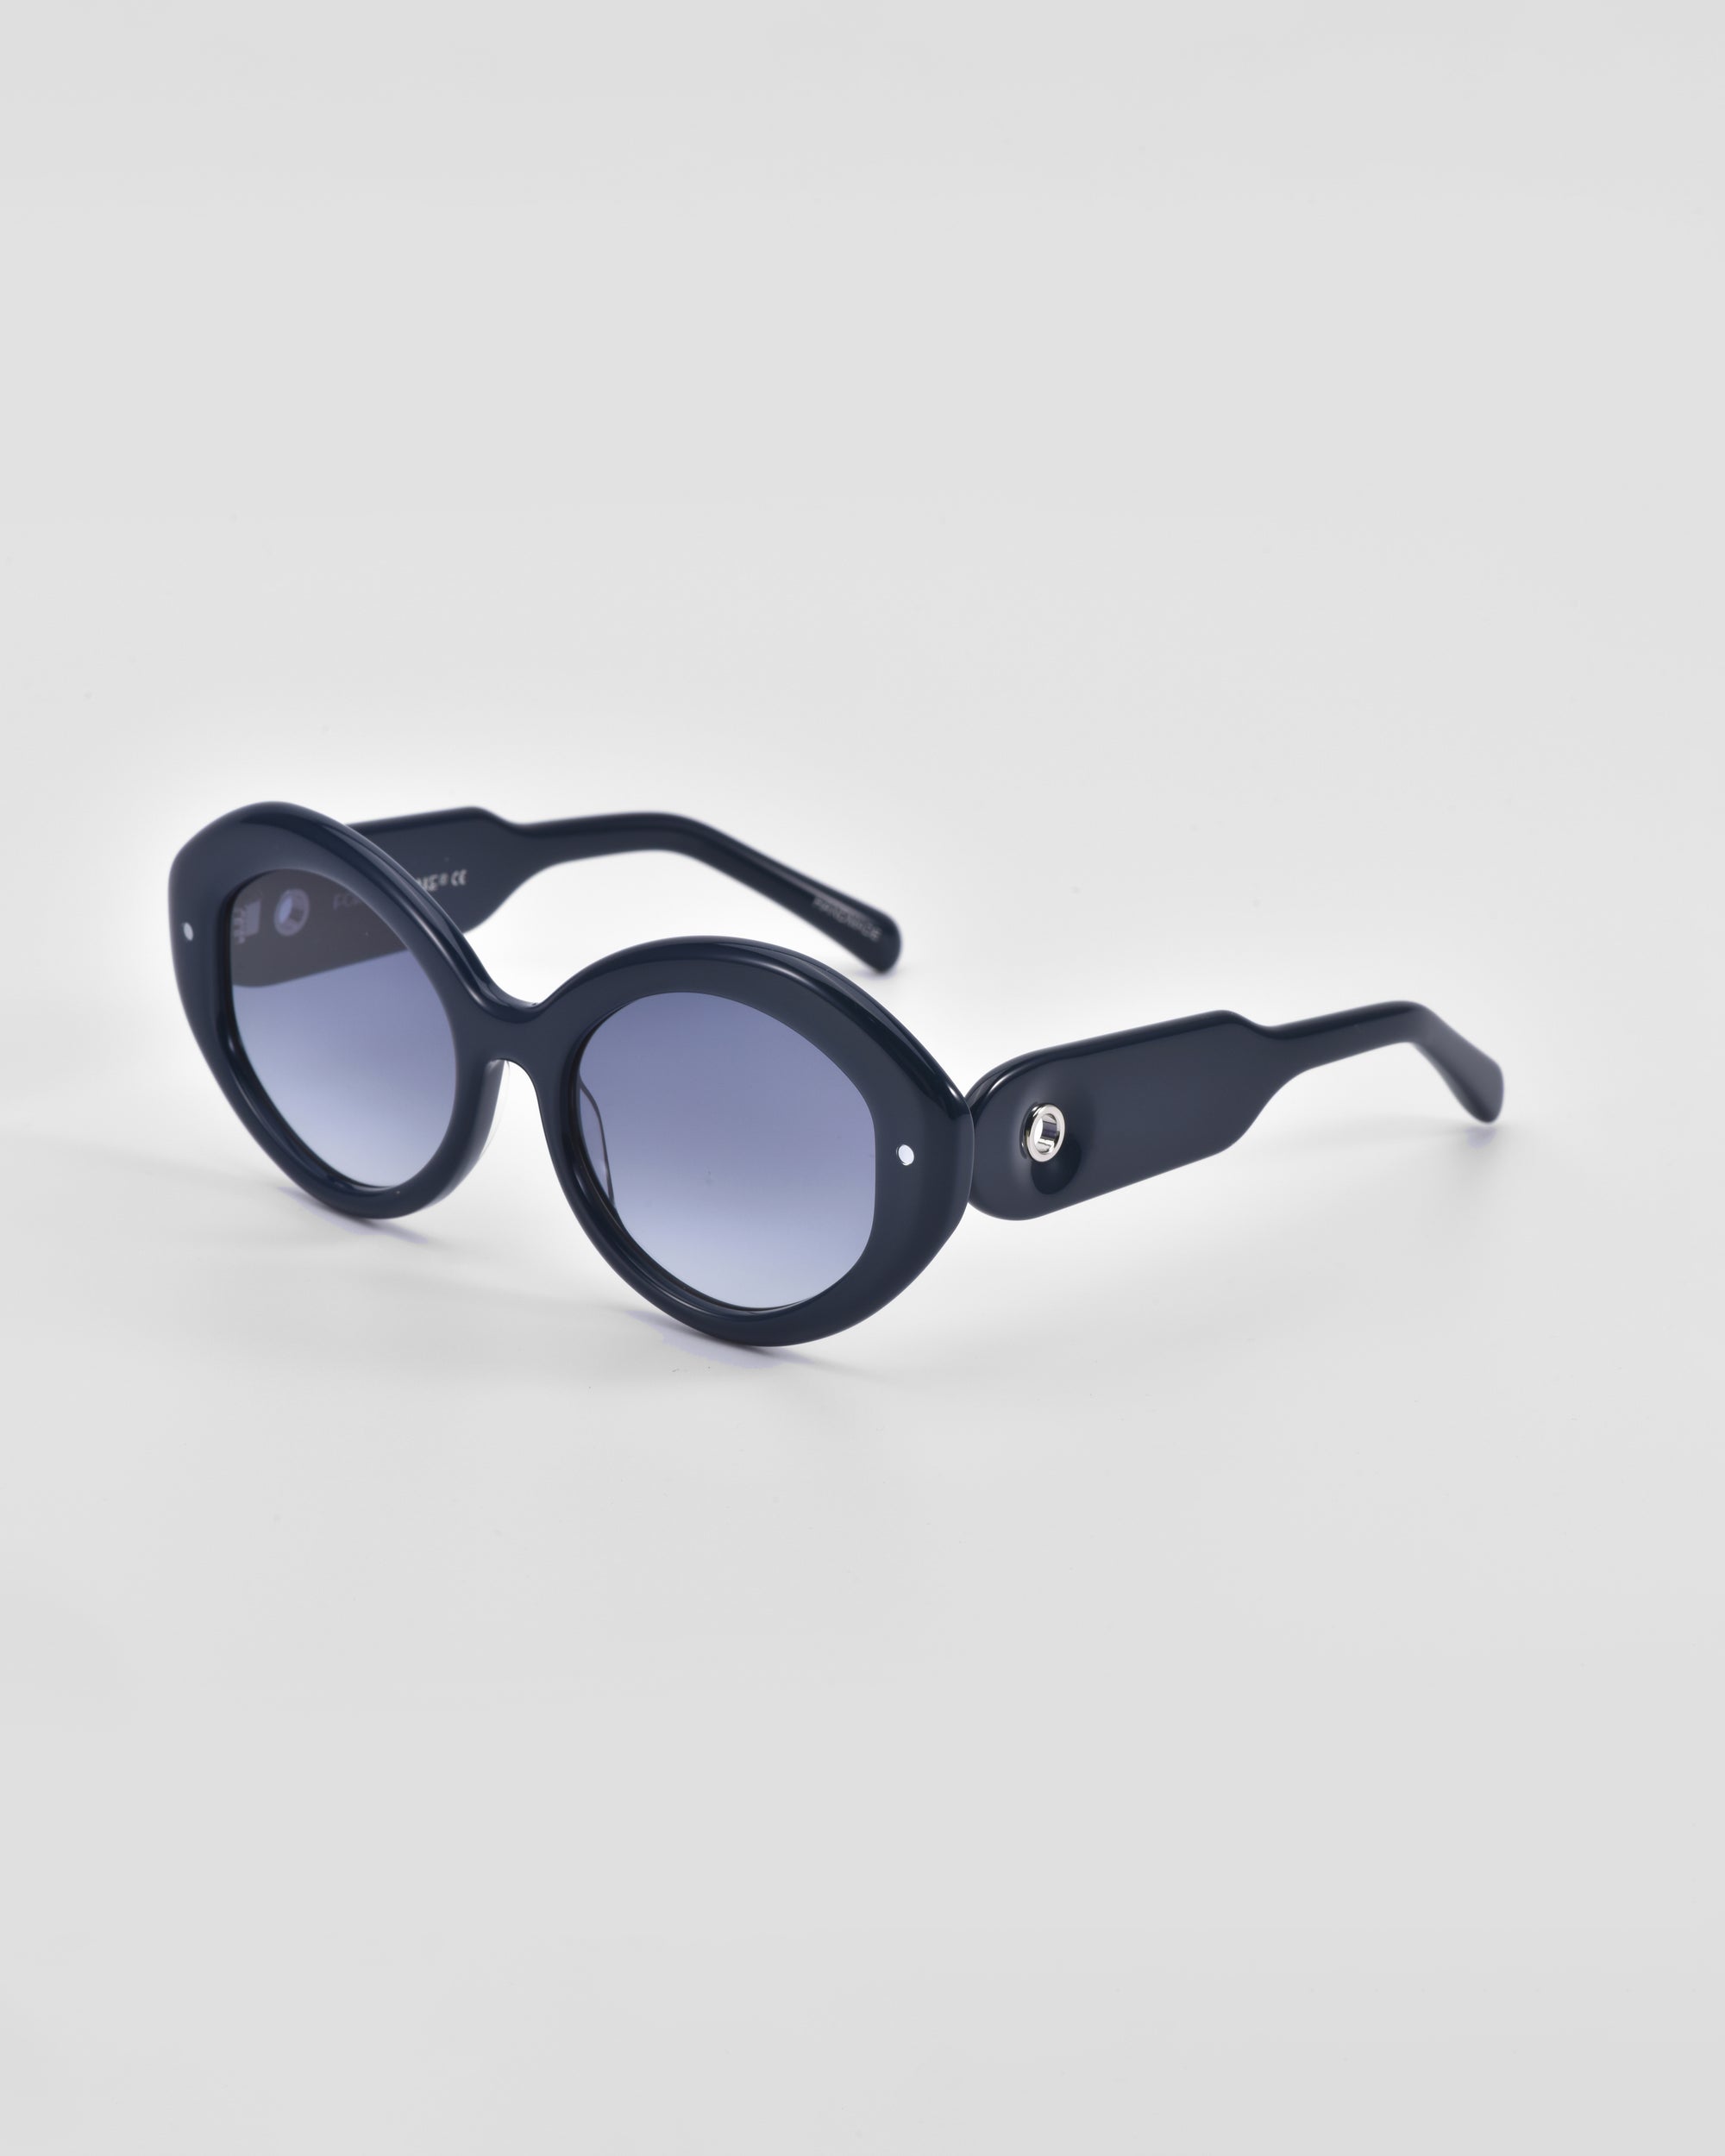 A pair of black oval For Art's Sake® Helios sunglasses with blue-tinted lenses placed on a white surface. The arms are wide and feature a small silver circular detail near the hinge. This piece of luxury eyewear boasts a sleek and modern design, suitable for both casual and formal wear.